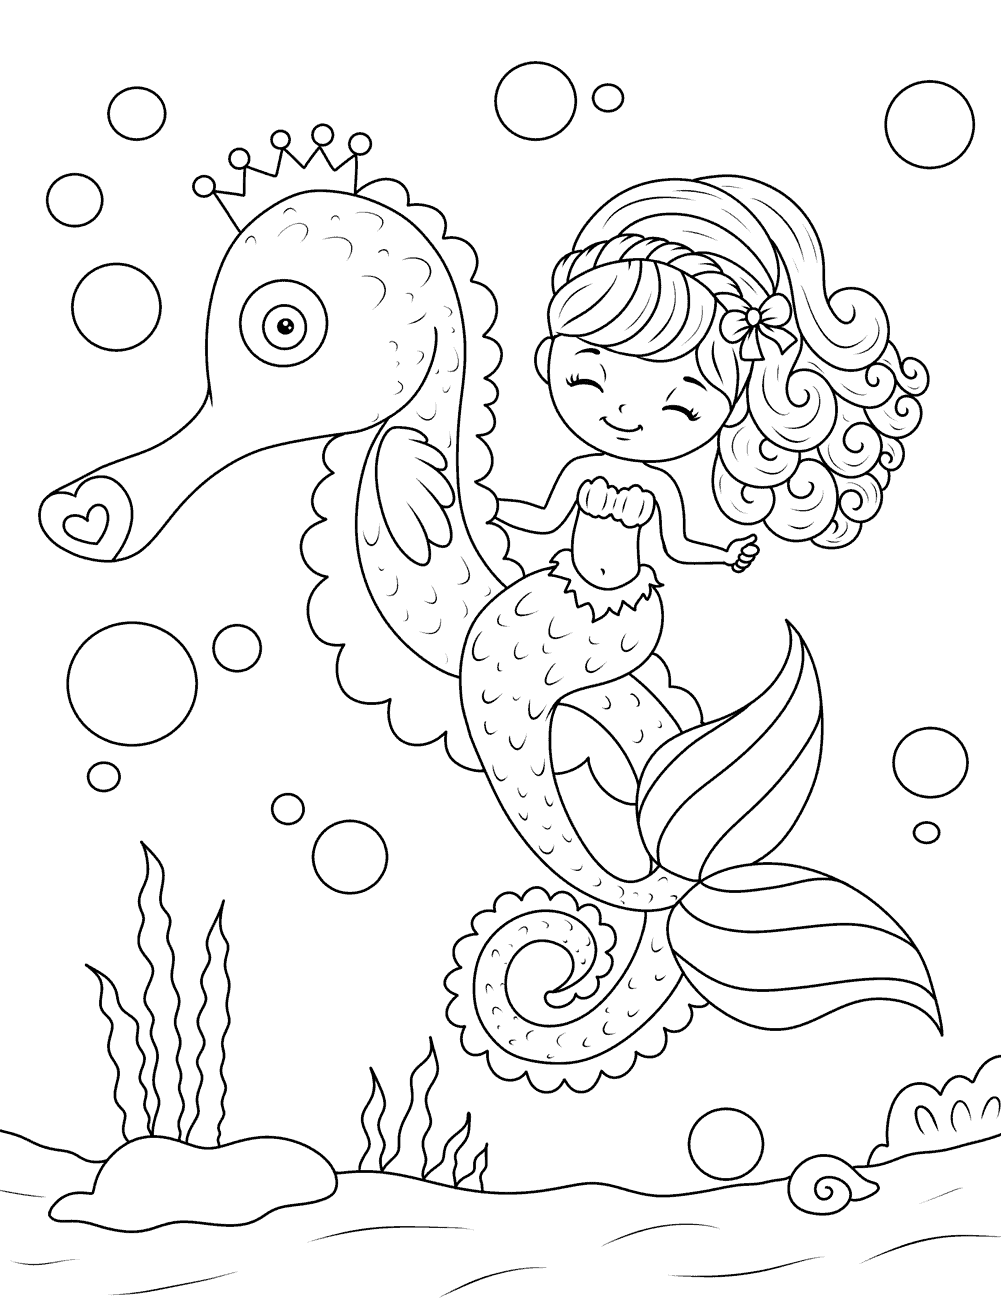 Mermaid on a seahorse coloring page